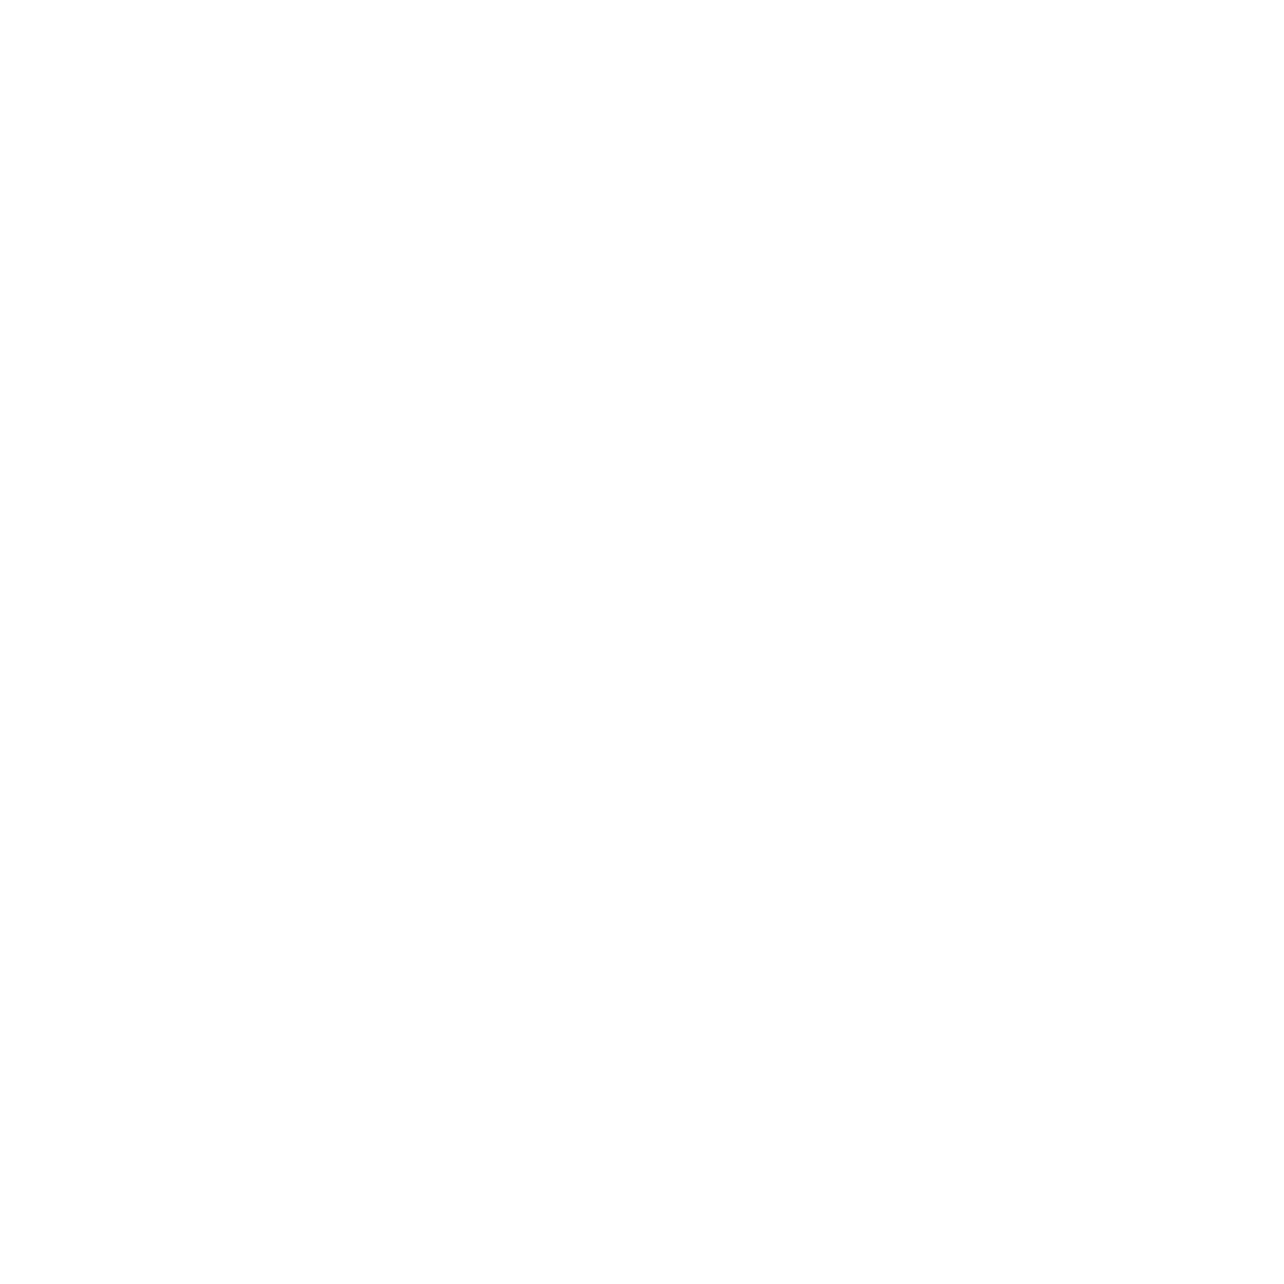 Viaduct City Rentals | Auckland Viaduct and CBD Property Management Specialists